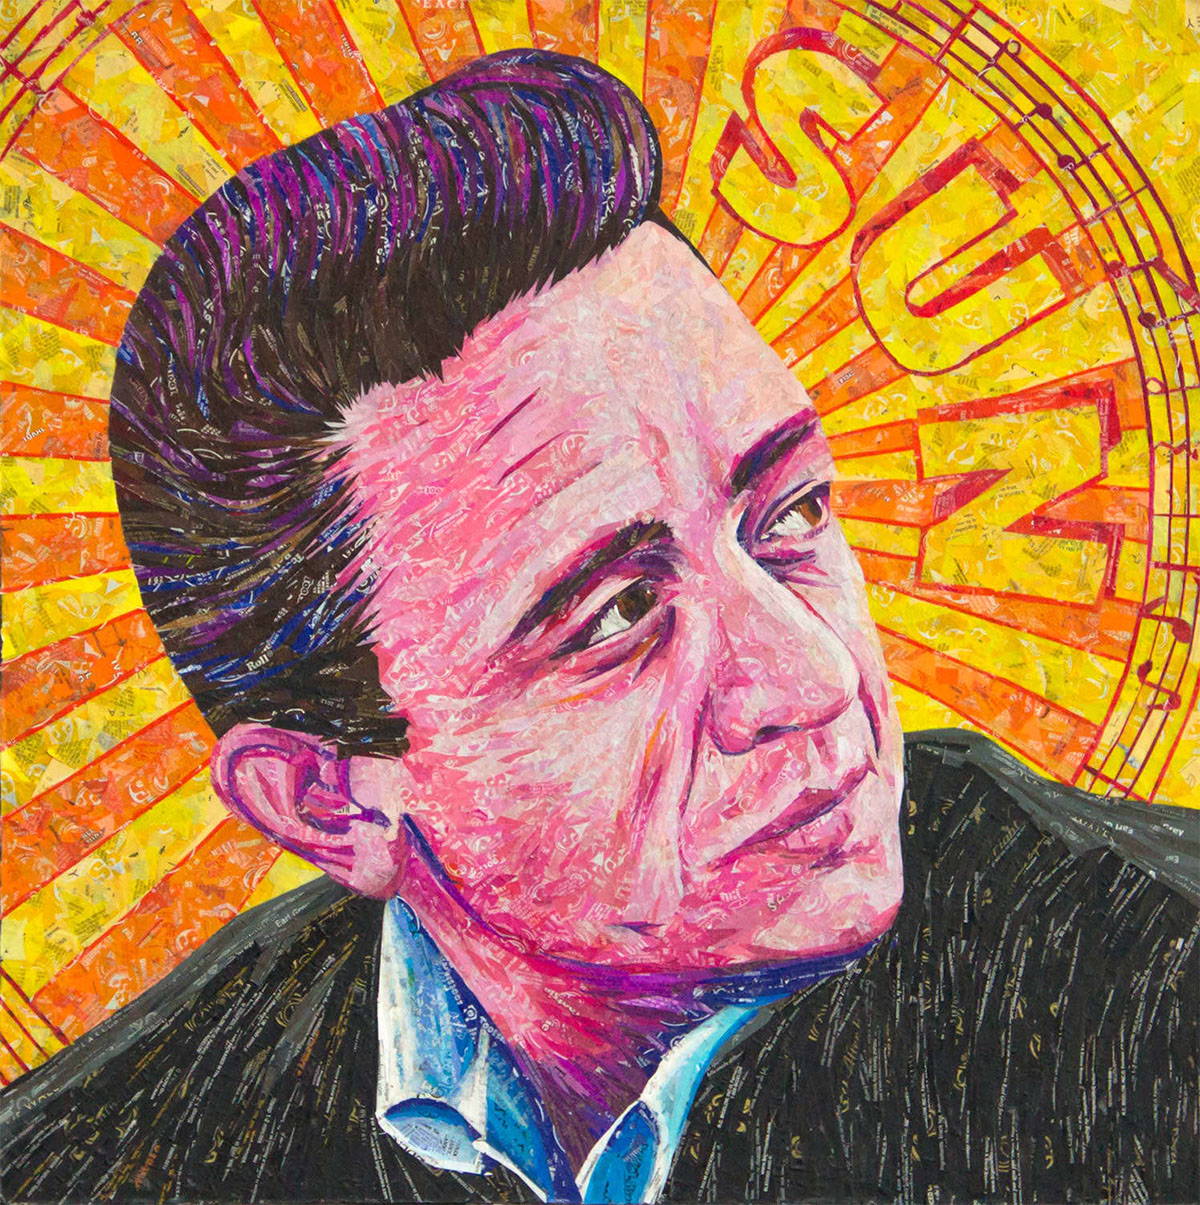 recycled art johnny cash legend recycled material upcycled art eco art Pop Art collage mosaic portrait Country Music Nashville Sun Records